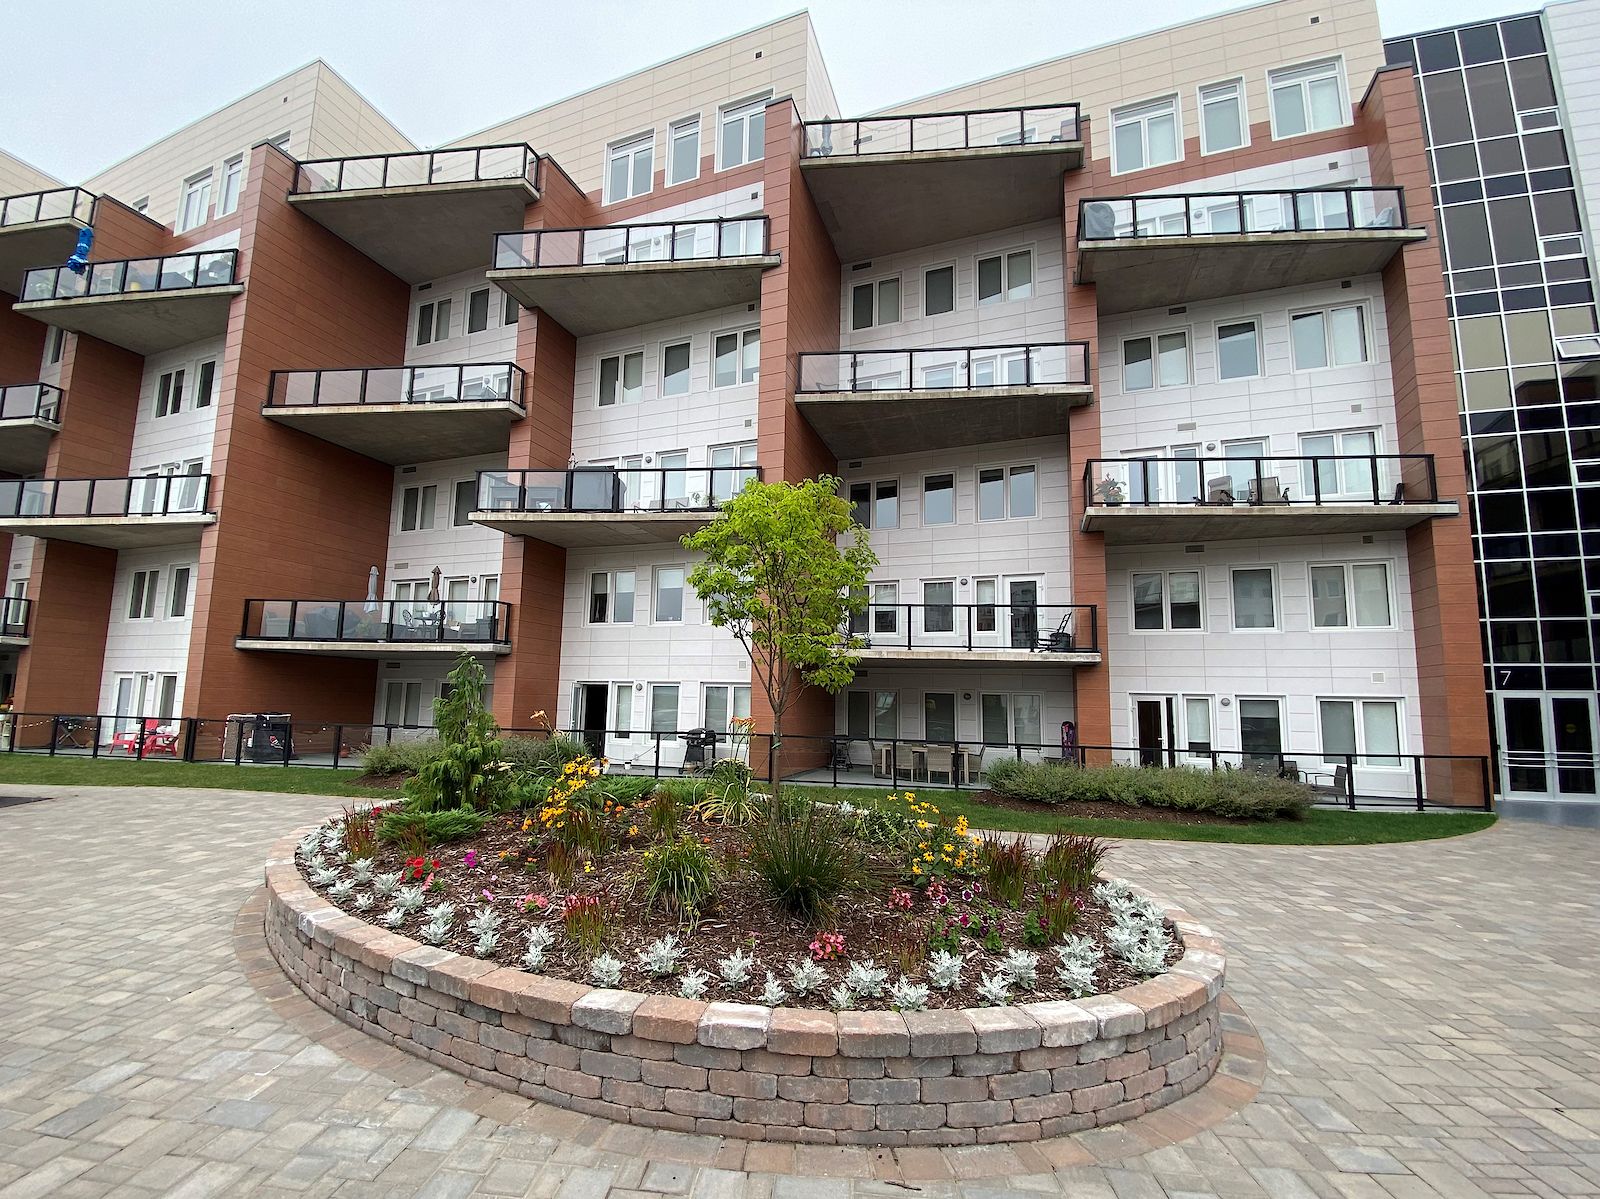 Halifax Pet Friendly Apartment For Rent | Luxury Apartments for Rent in